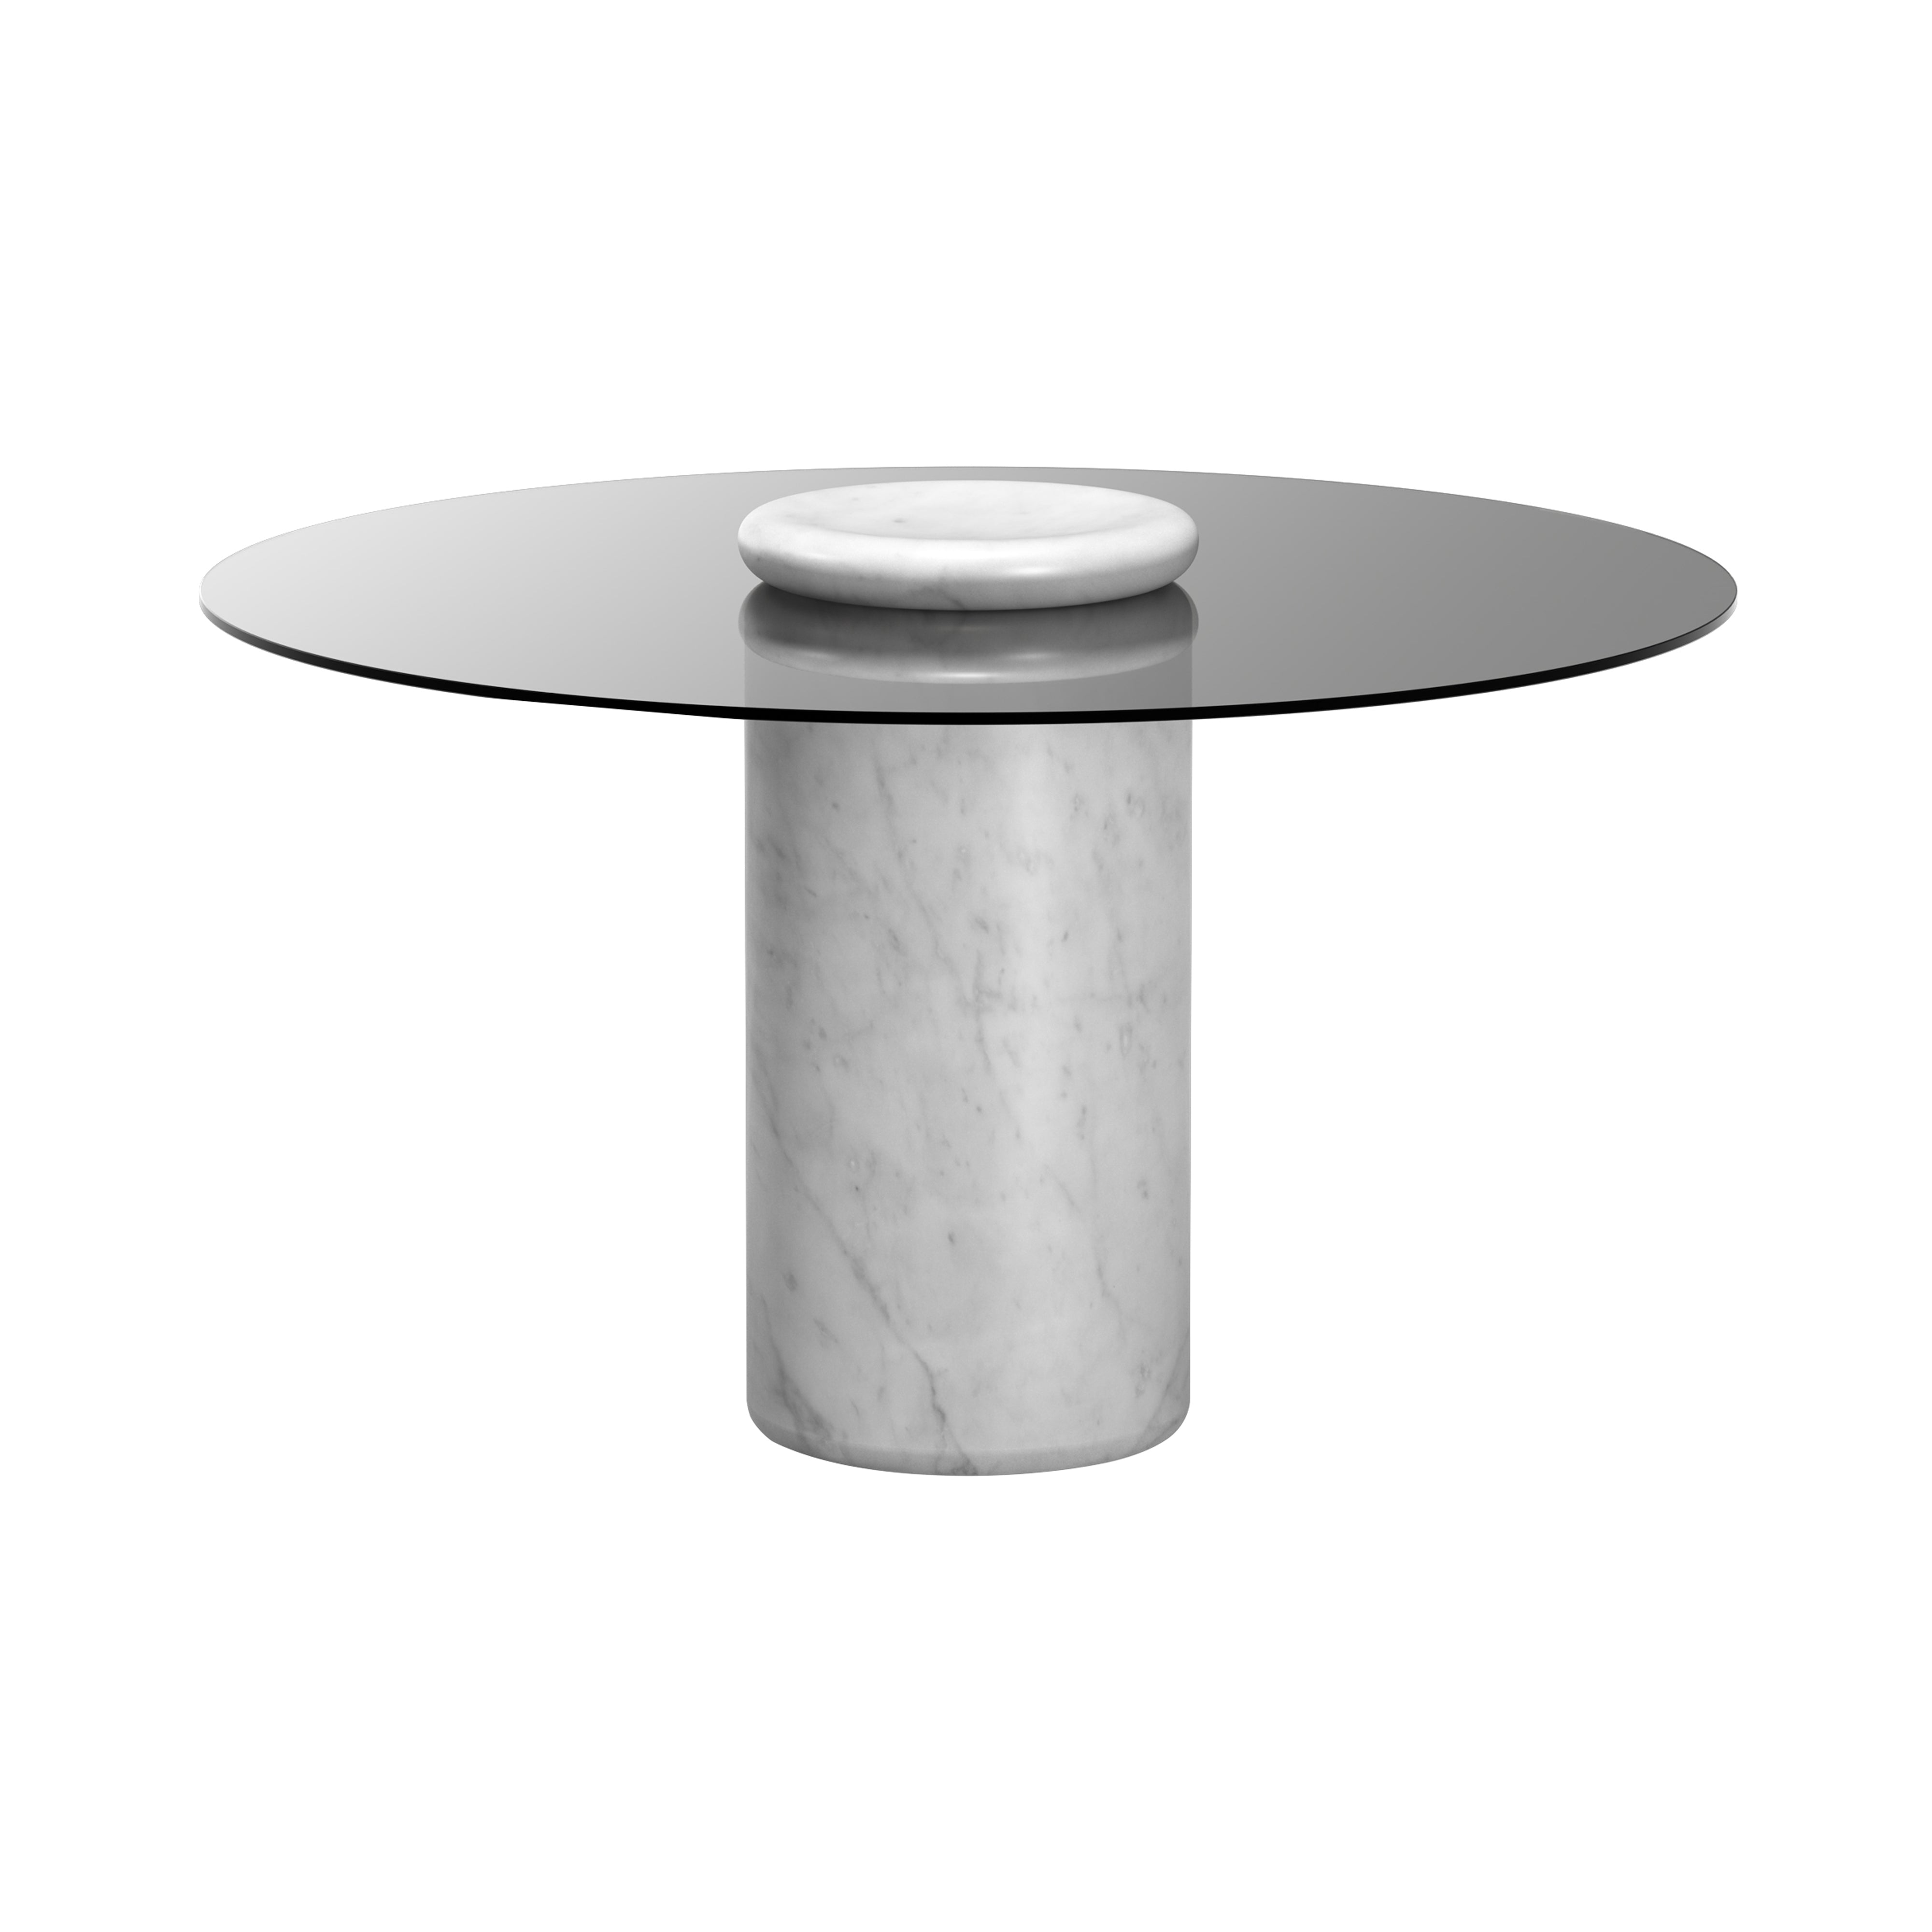 Castore Dining Table: Smoked Glass + Bianco Carrara Marble